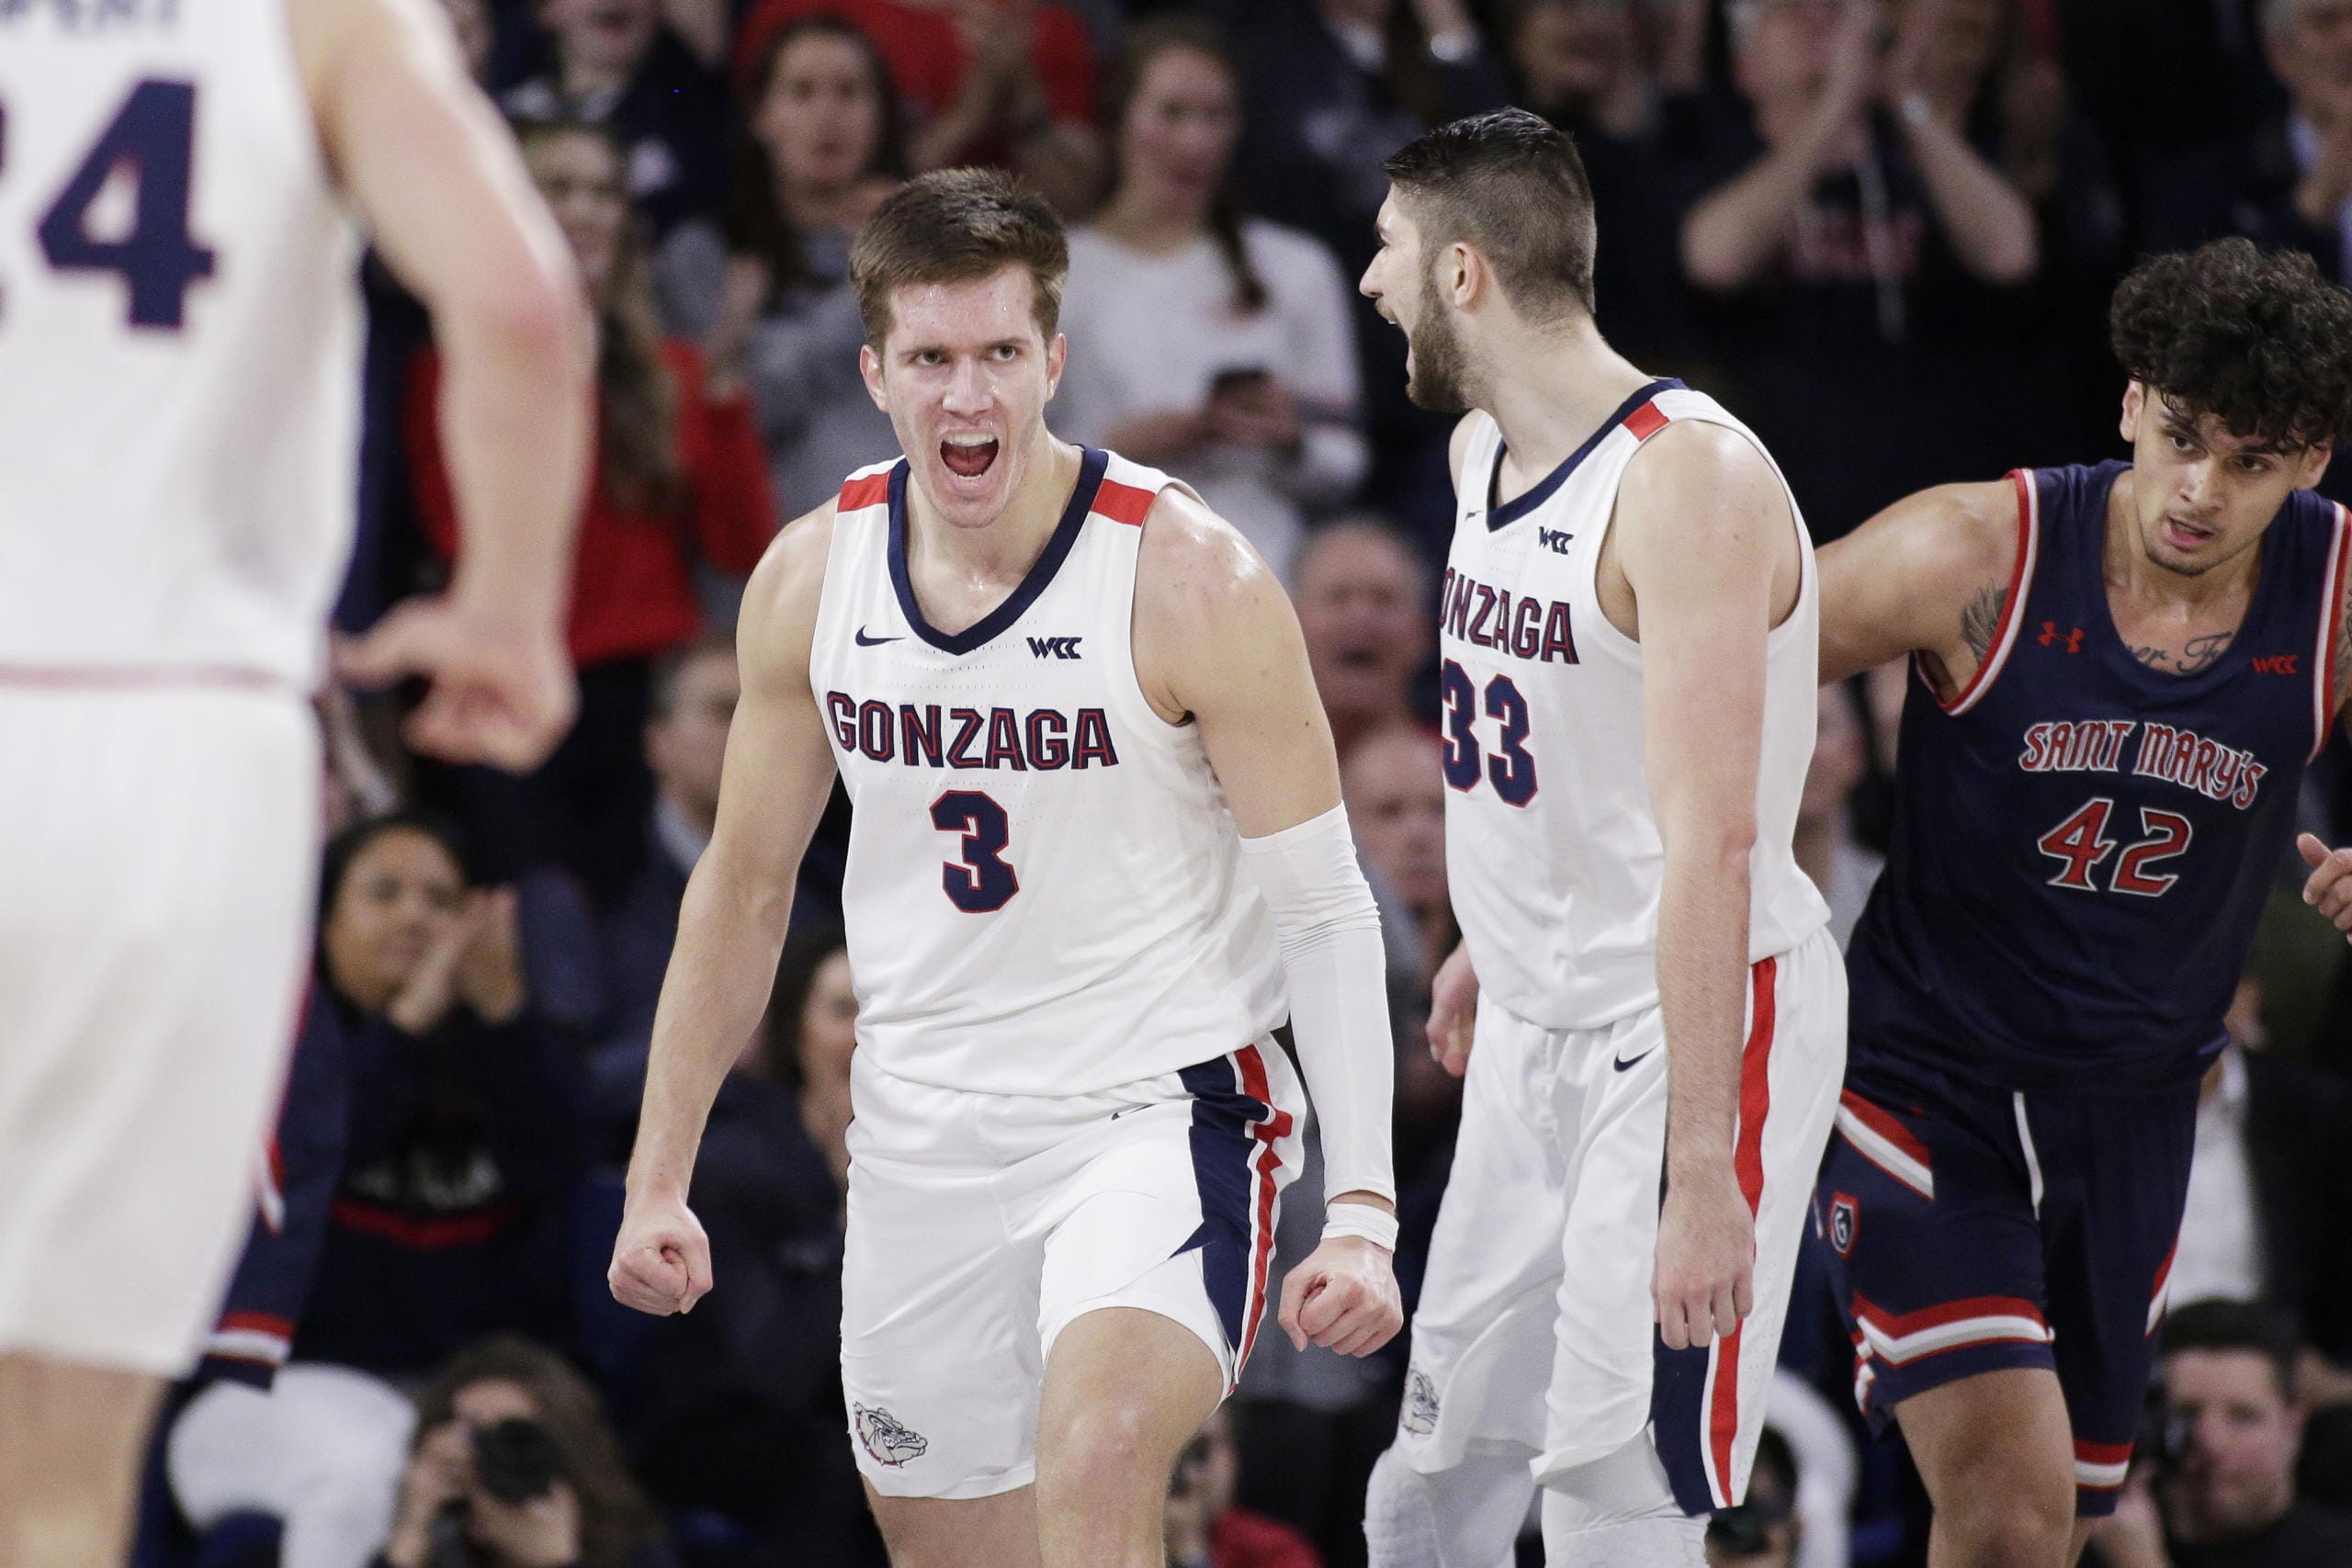 Gonzaga forwards Filip Petrusev (3) and Killian Tillie (33) celebrate after Petrusev scored during the second half of the team's NCAA college basketball game against Saint Mary's in Spokane, Wash., Saturday, Feb. 29, 2020. Gonzaga won 86-76.